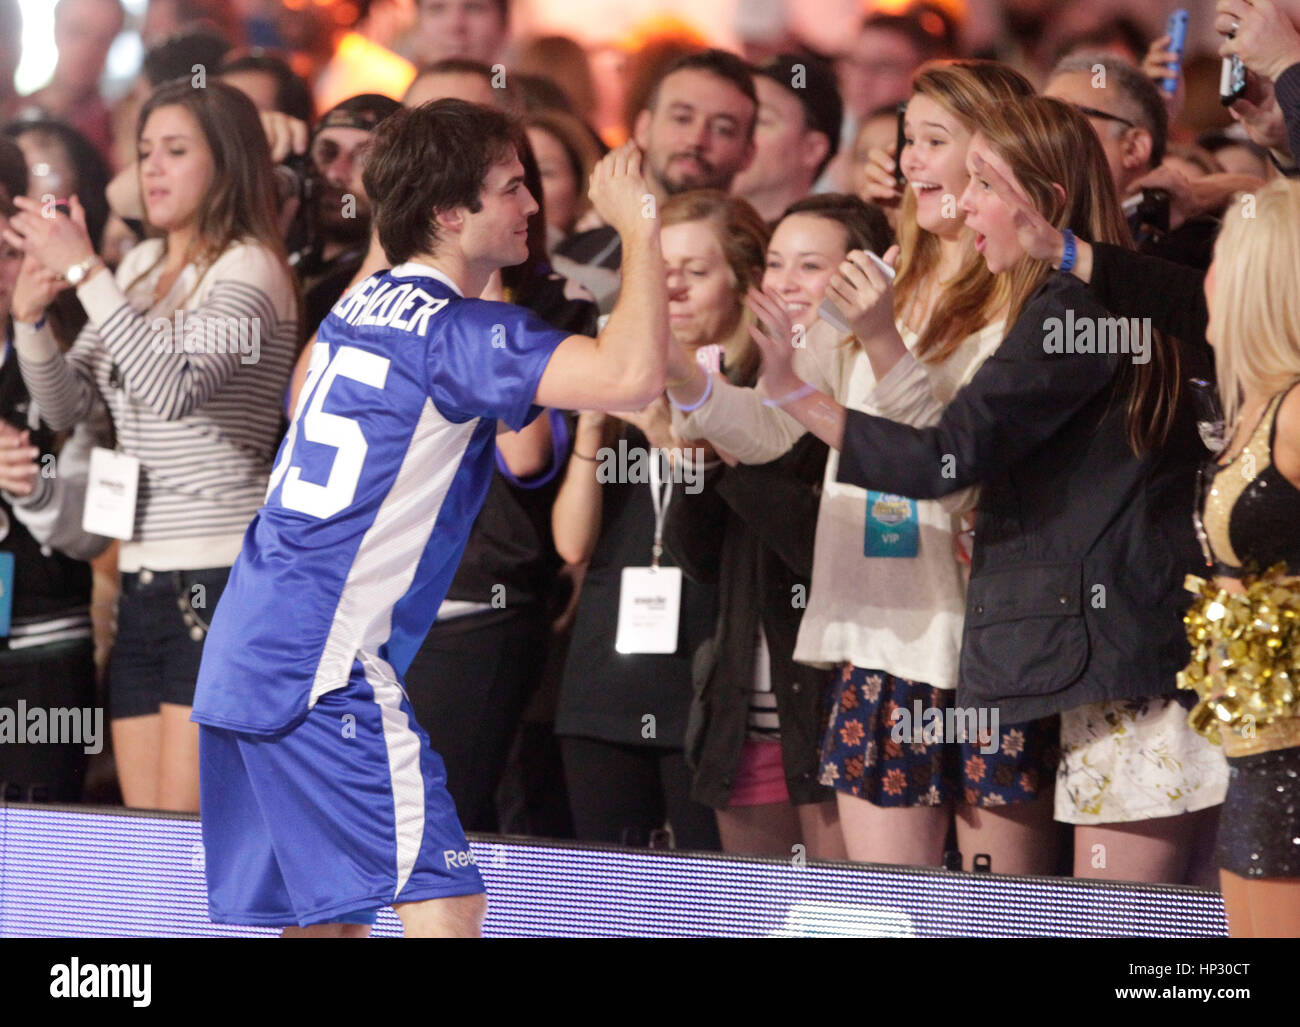 Ian Somerhalder greets fans in the stands at Directv's Seventh Annual Celebrity Beach Bowl on February 2, 2013, in New Orleans, Louisiana. Photo by Francis Specker Stock Photo